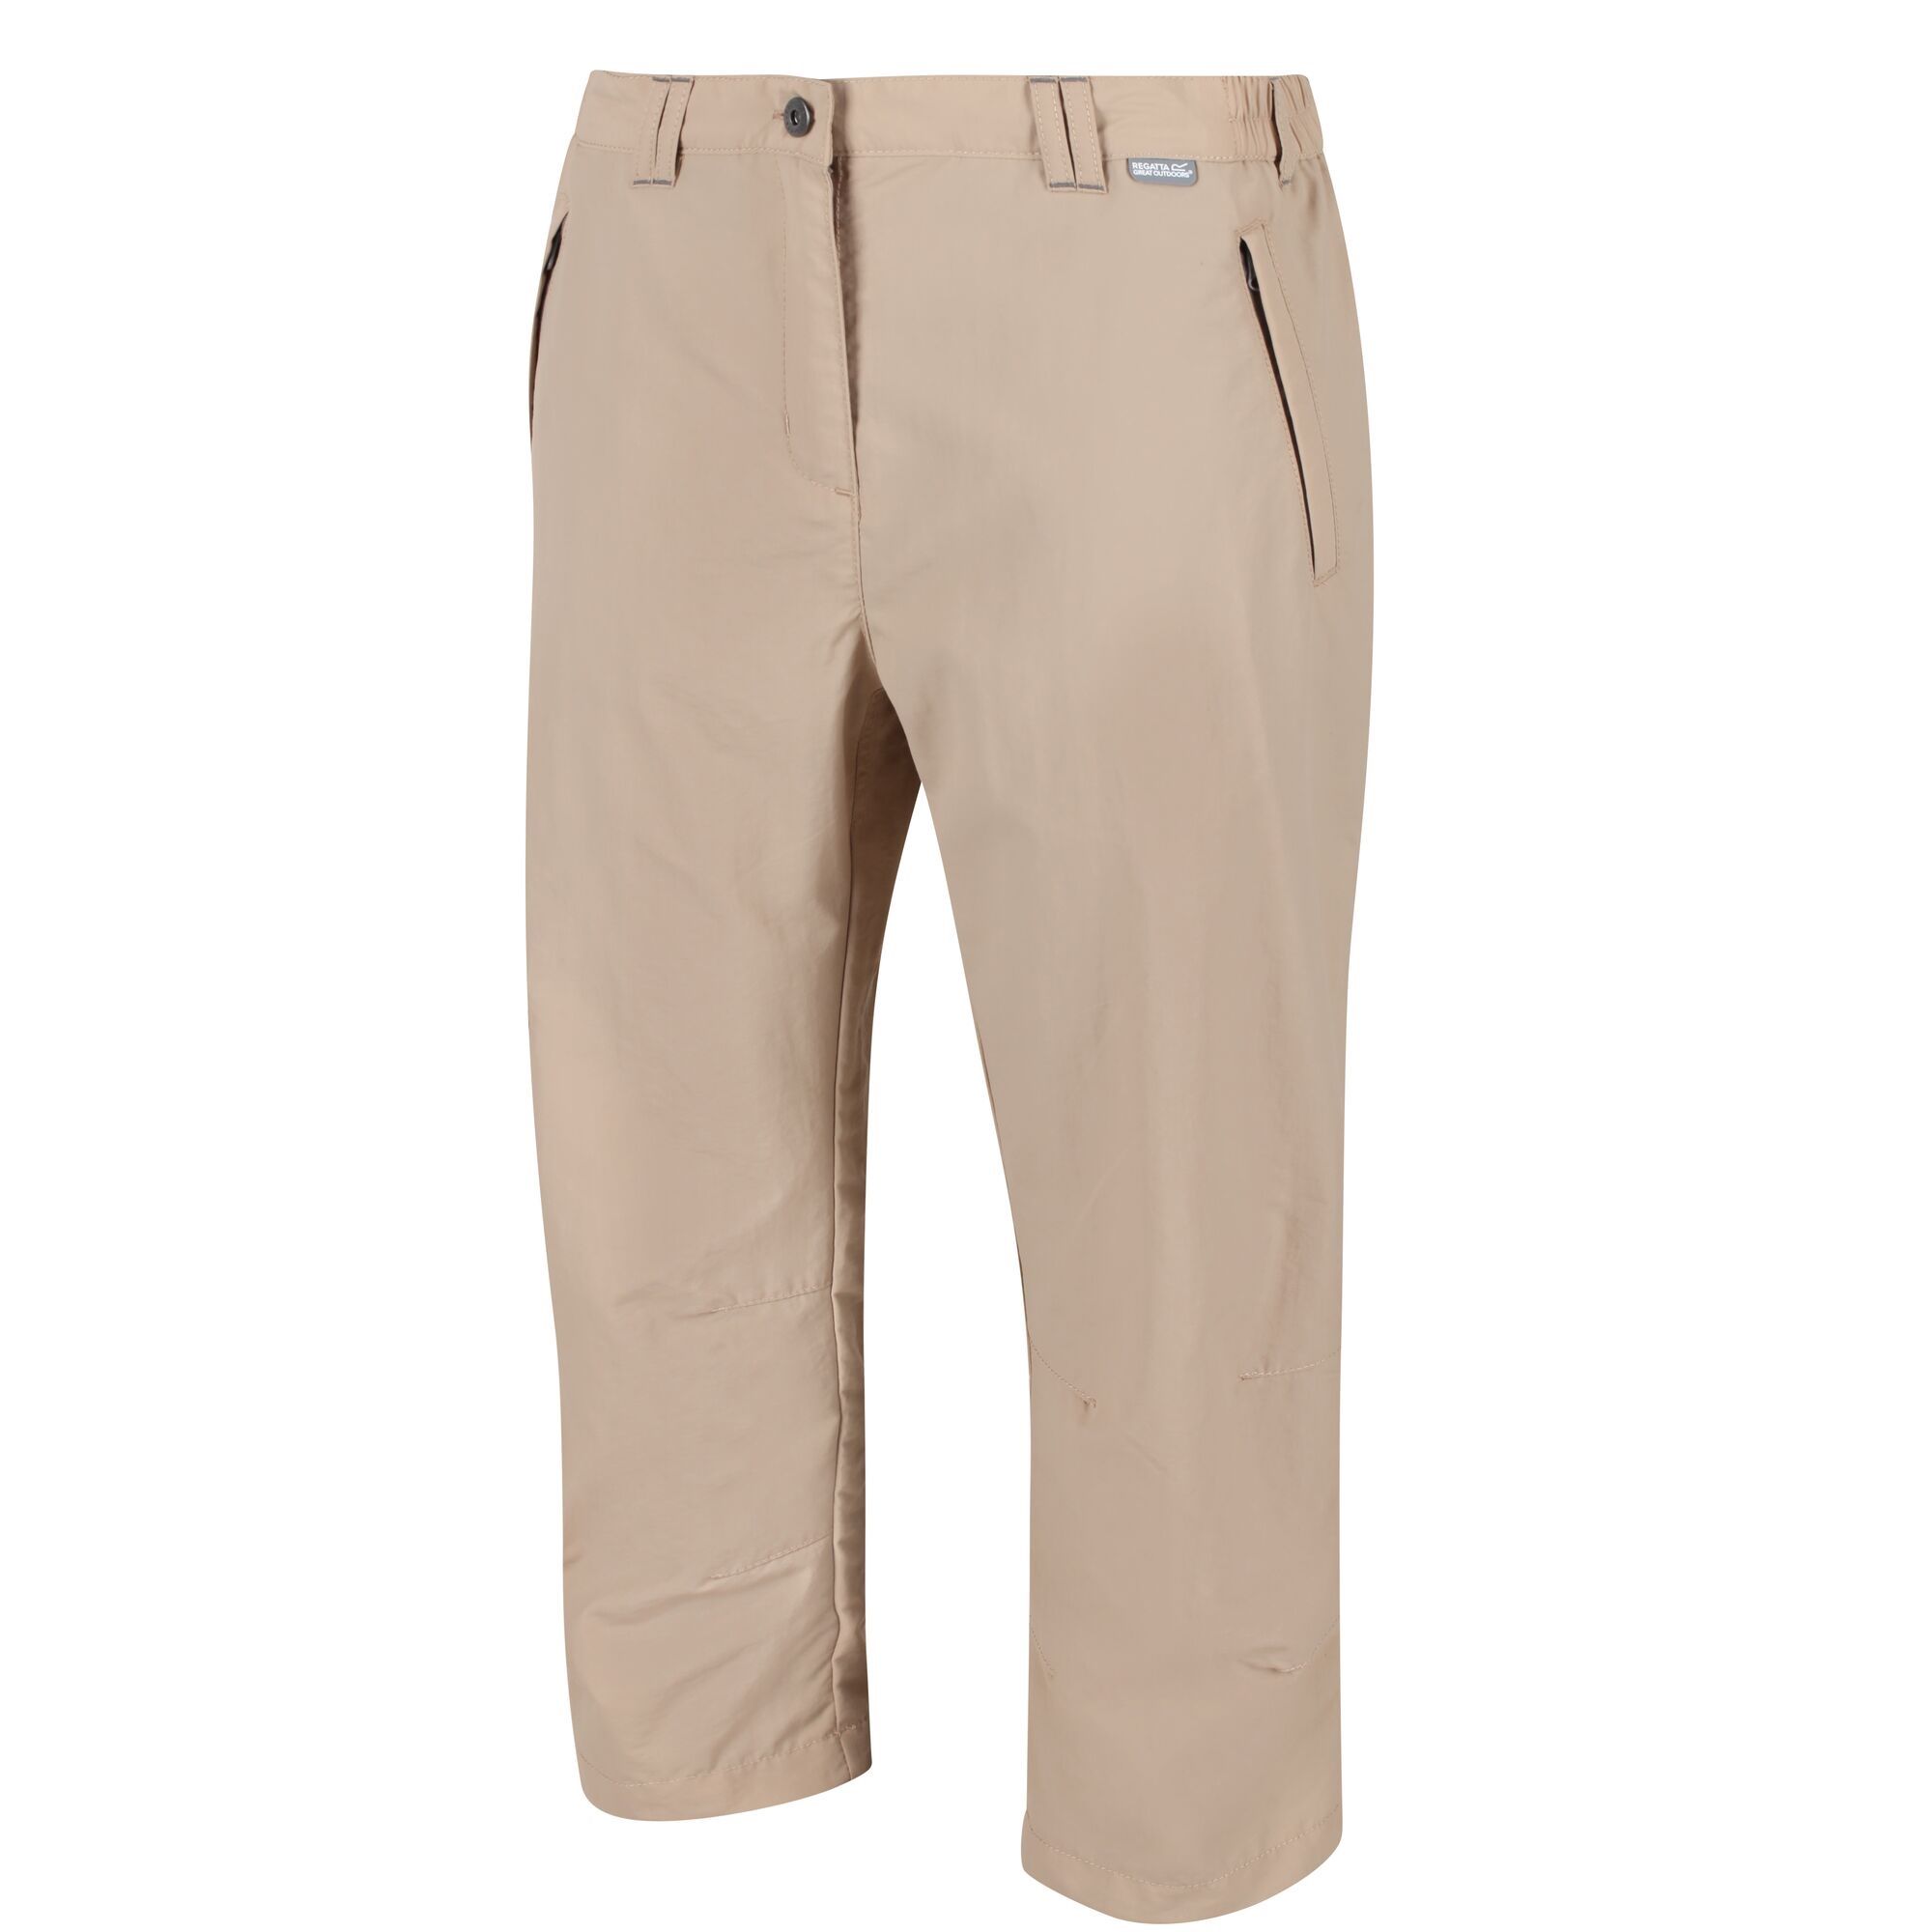 Material: 100% lightweight polyamide fabric. Durable water repellent finish. UV protection (UPF) of 40+. Quick drying. Crease resistant. Part elasticated waist. Multi pocketed. Drawcord at leg hems.